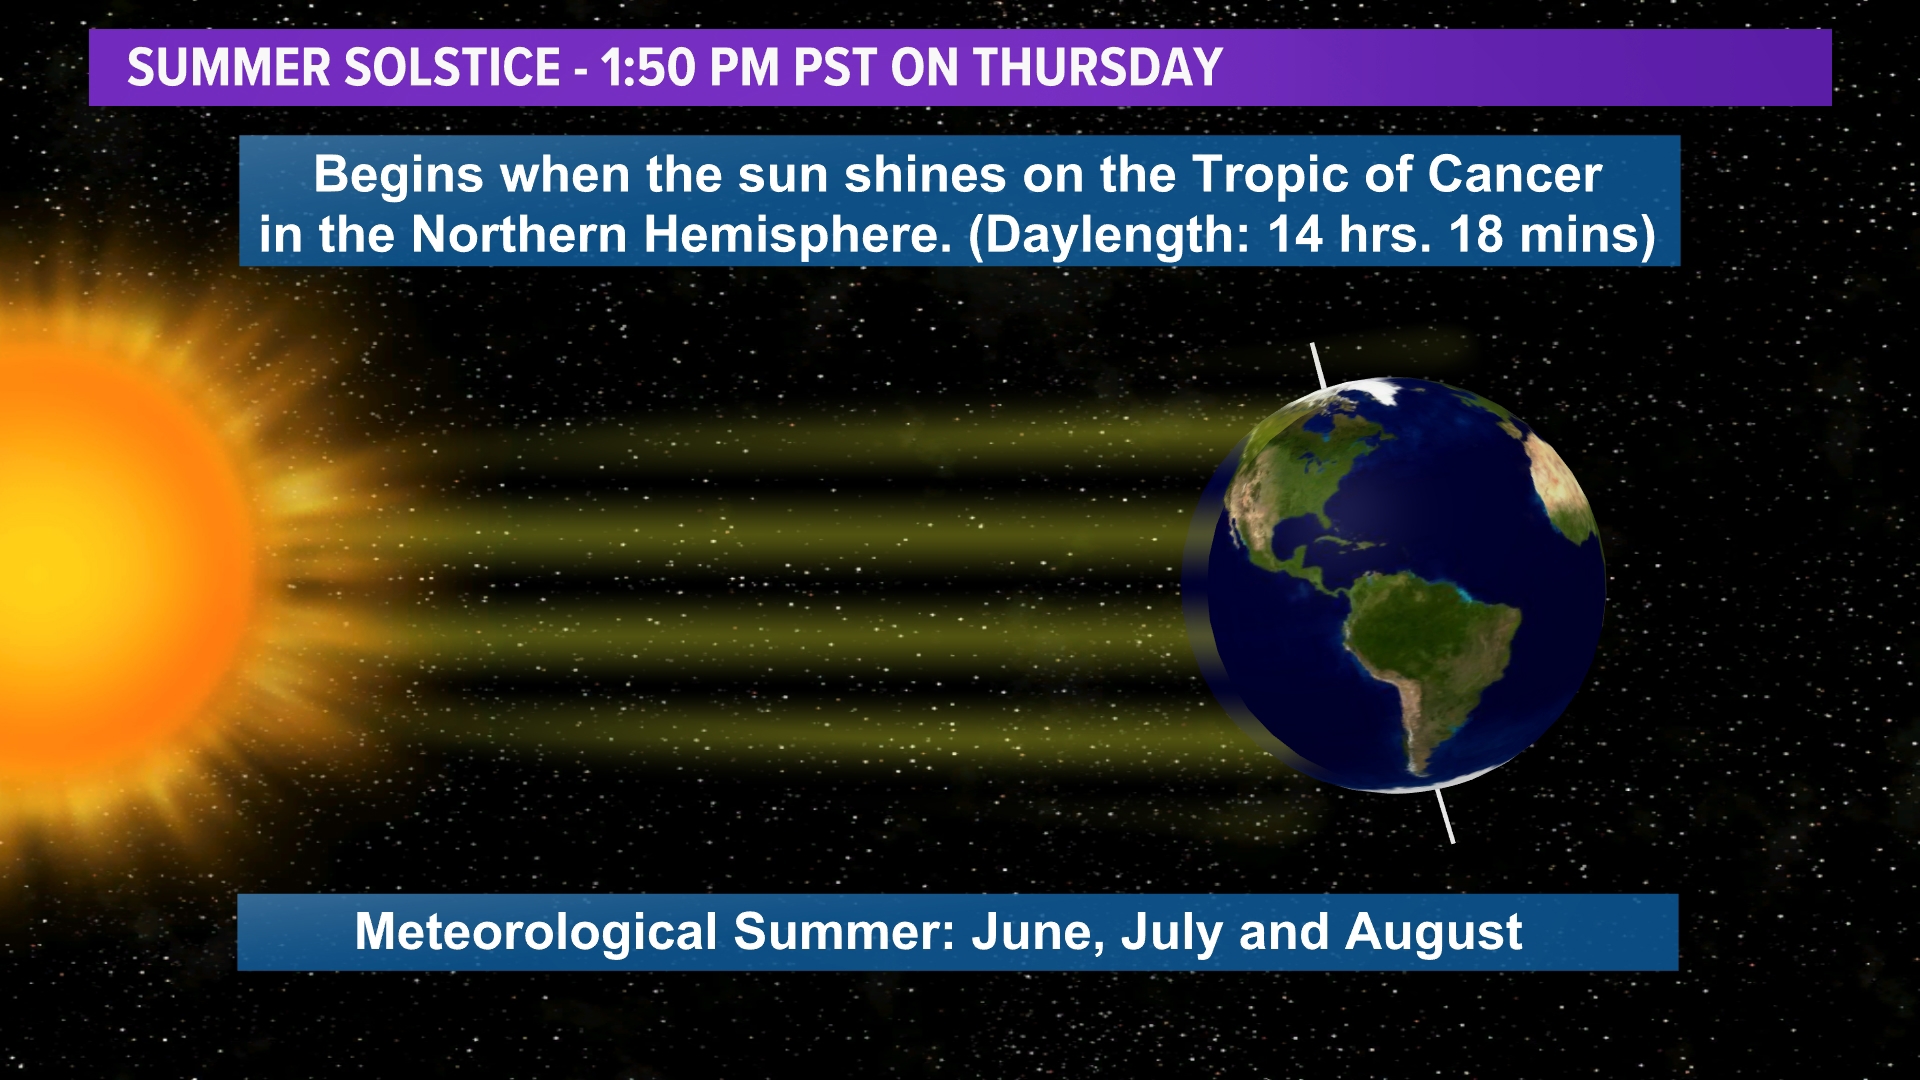 A sign that Summer is starting is the Summer Solstice, which will be at 1:50 p.m. Thursday. Sunrise will be at 5:41 a.m. and sunset will be at 7:59 p.m.